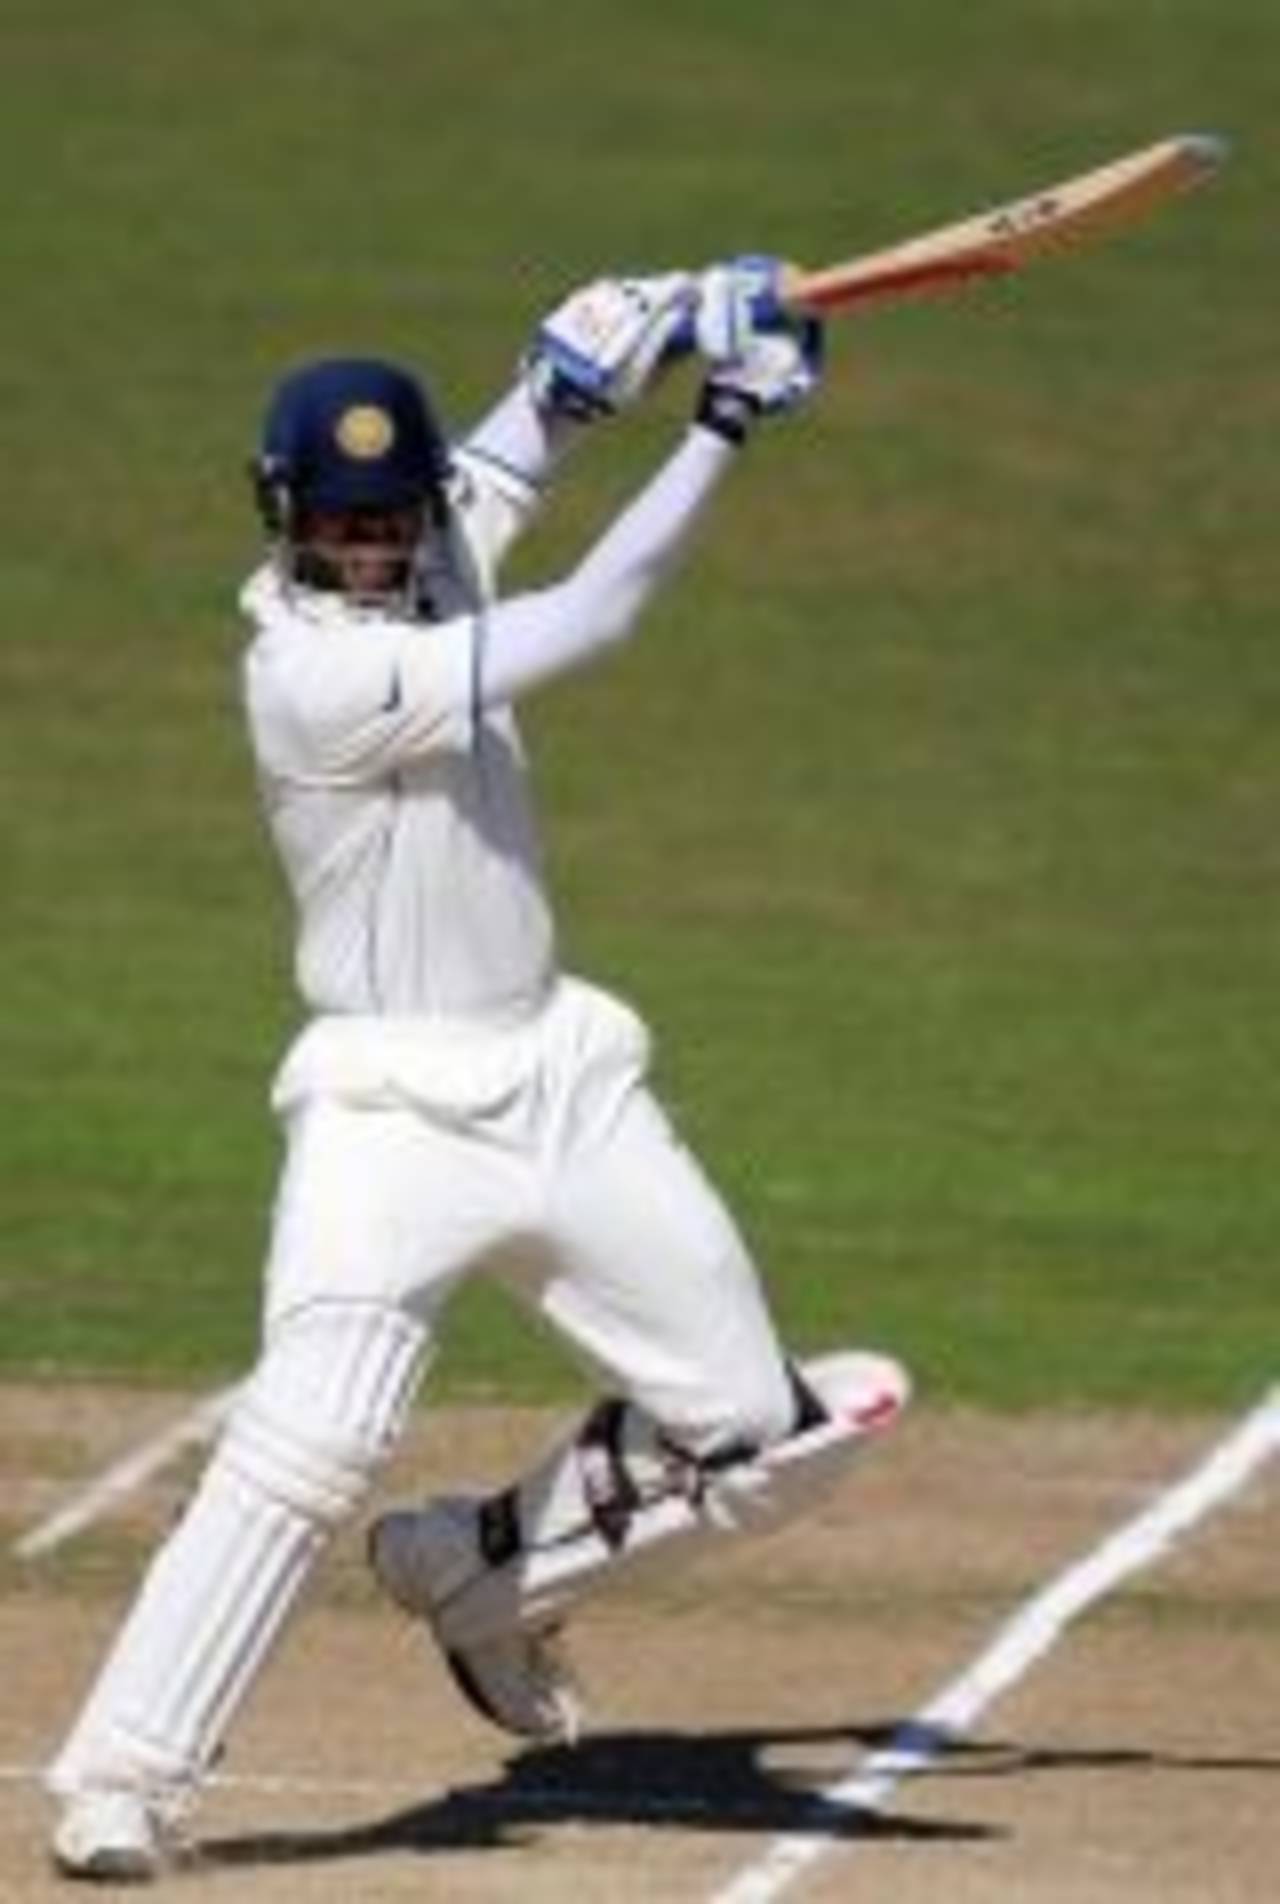 Rahul Dravid plays off the back foot, New Zealand v India, 2nd Test, Napier, 4th day, March 29, 2009